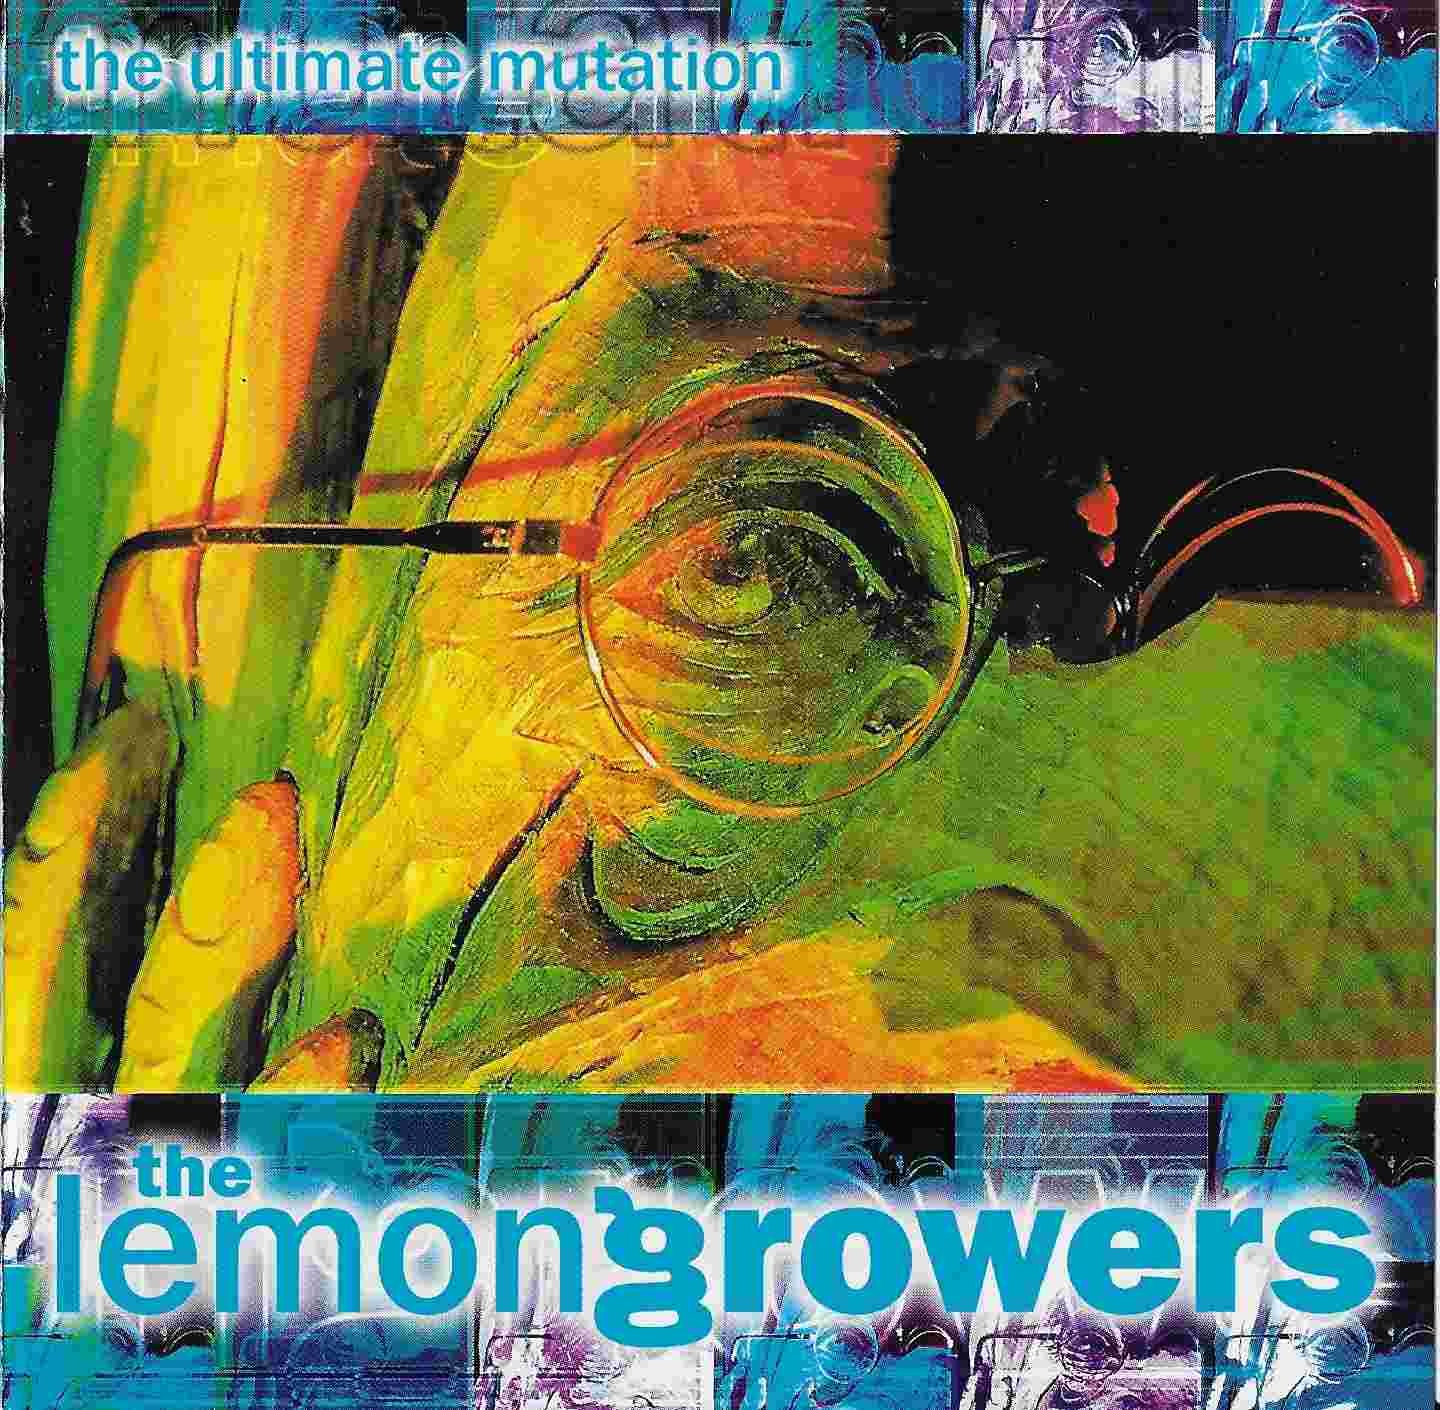 Picture of NBX 032 The ultimate mutation by artist The Lemon Growers from The Stranglers cds